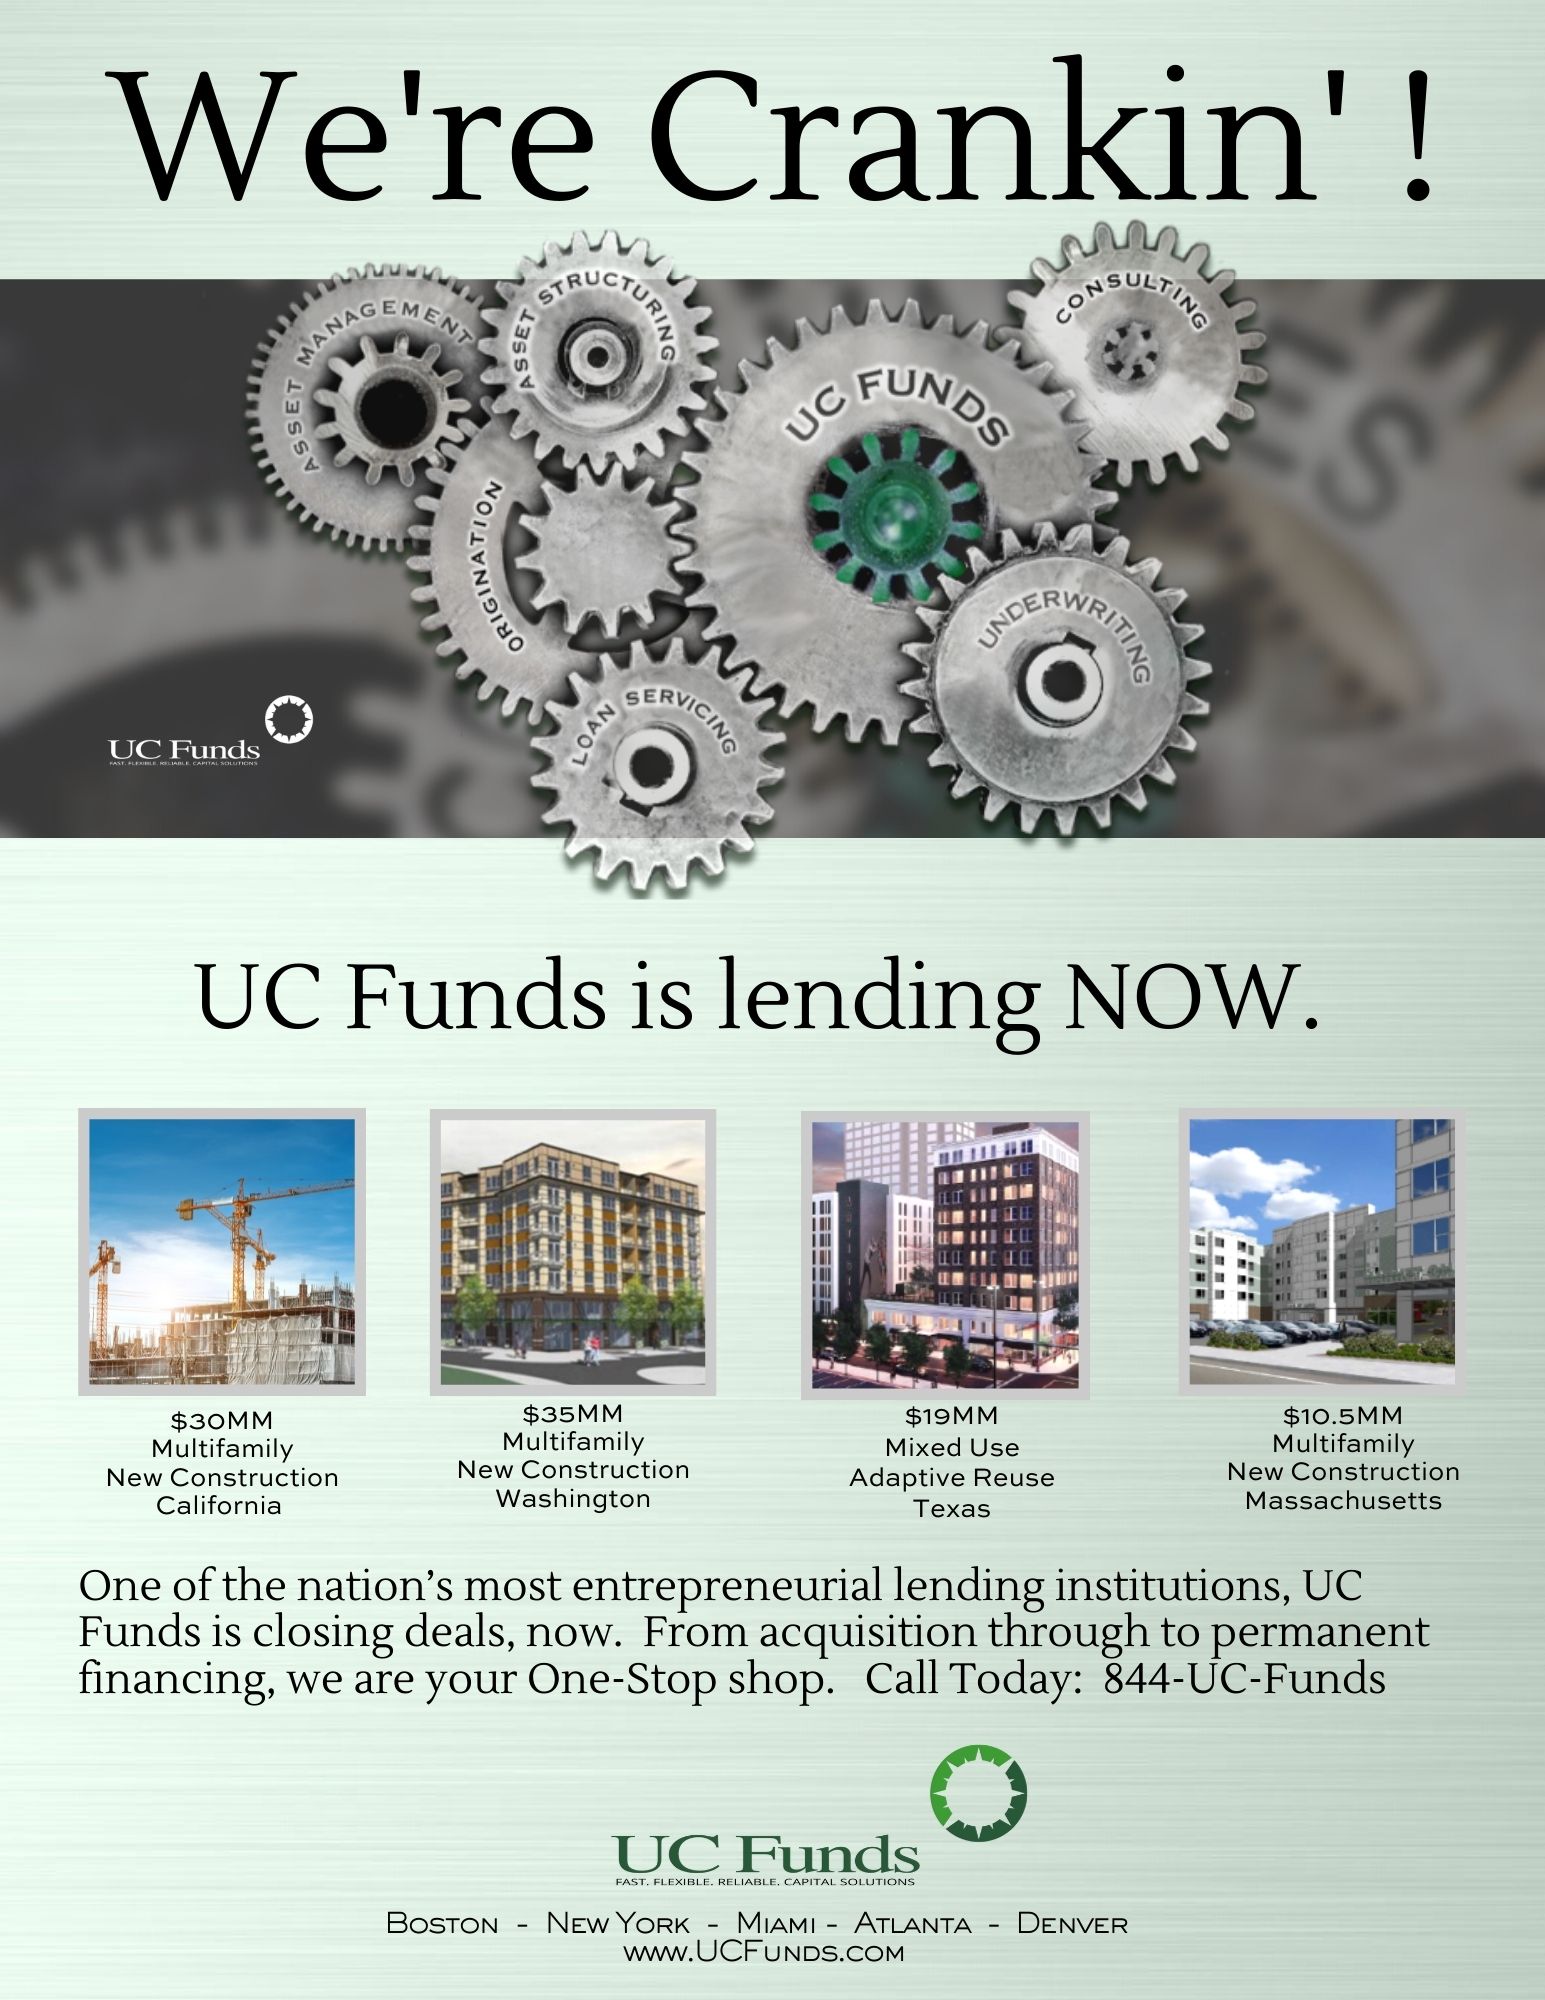 UC Funds Commercial Real Estate lending